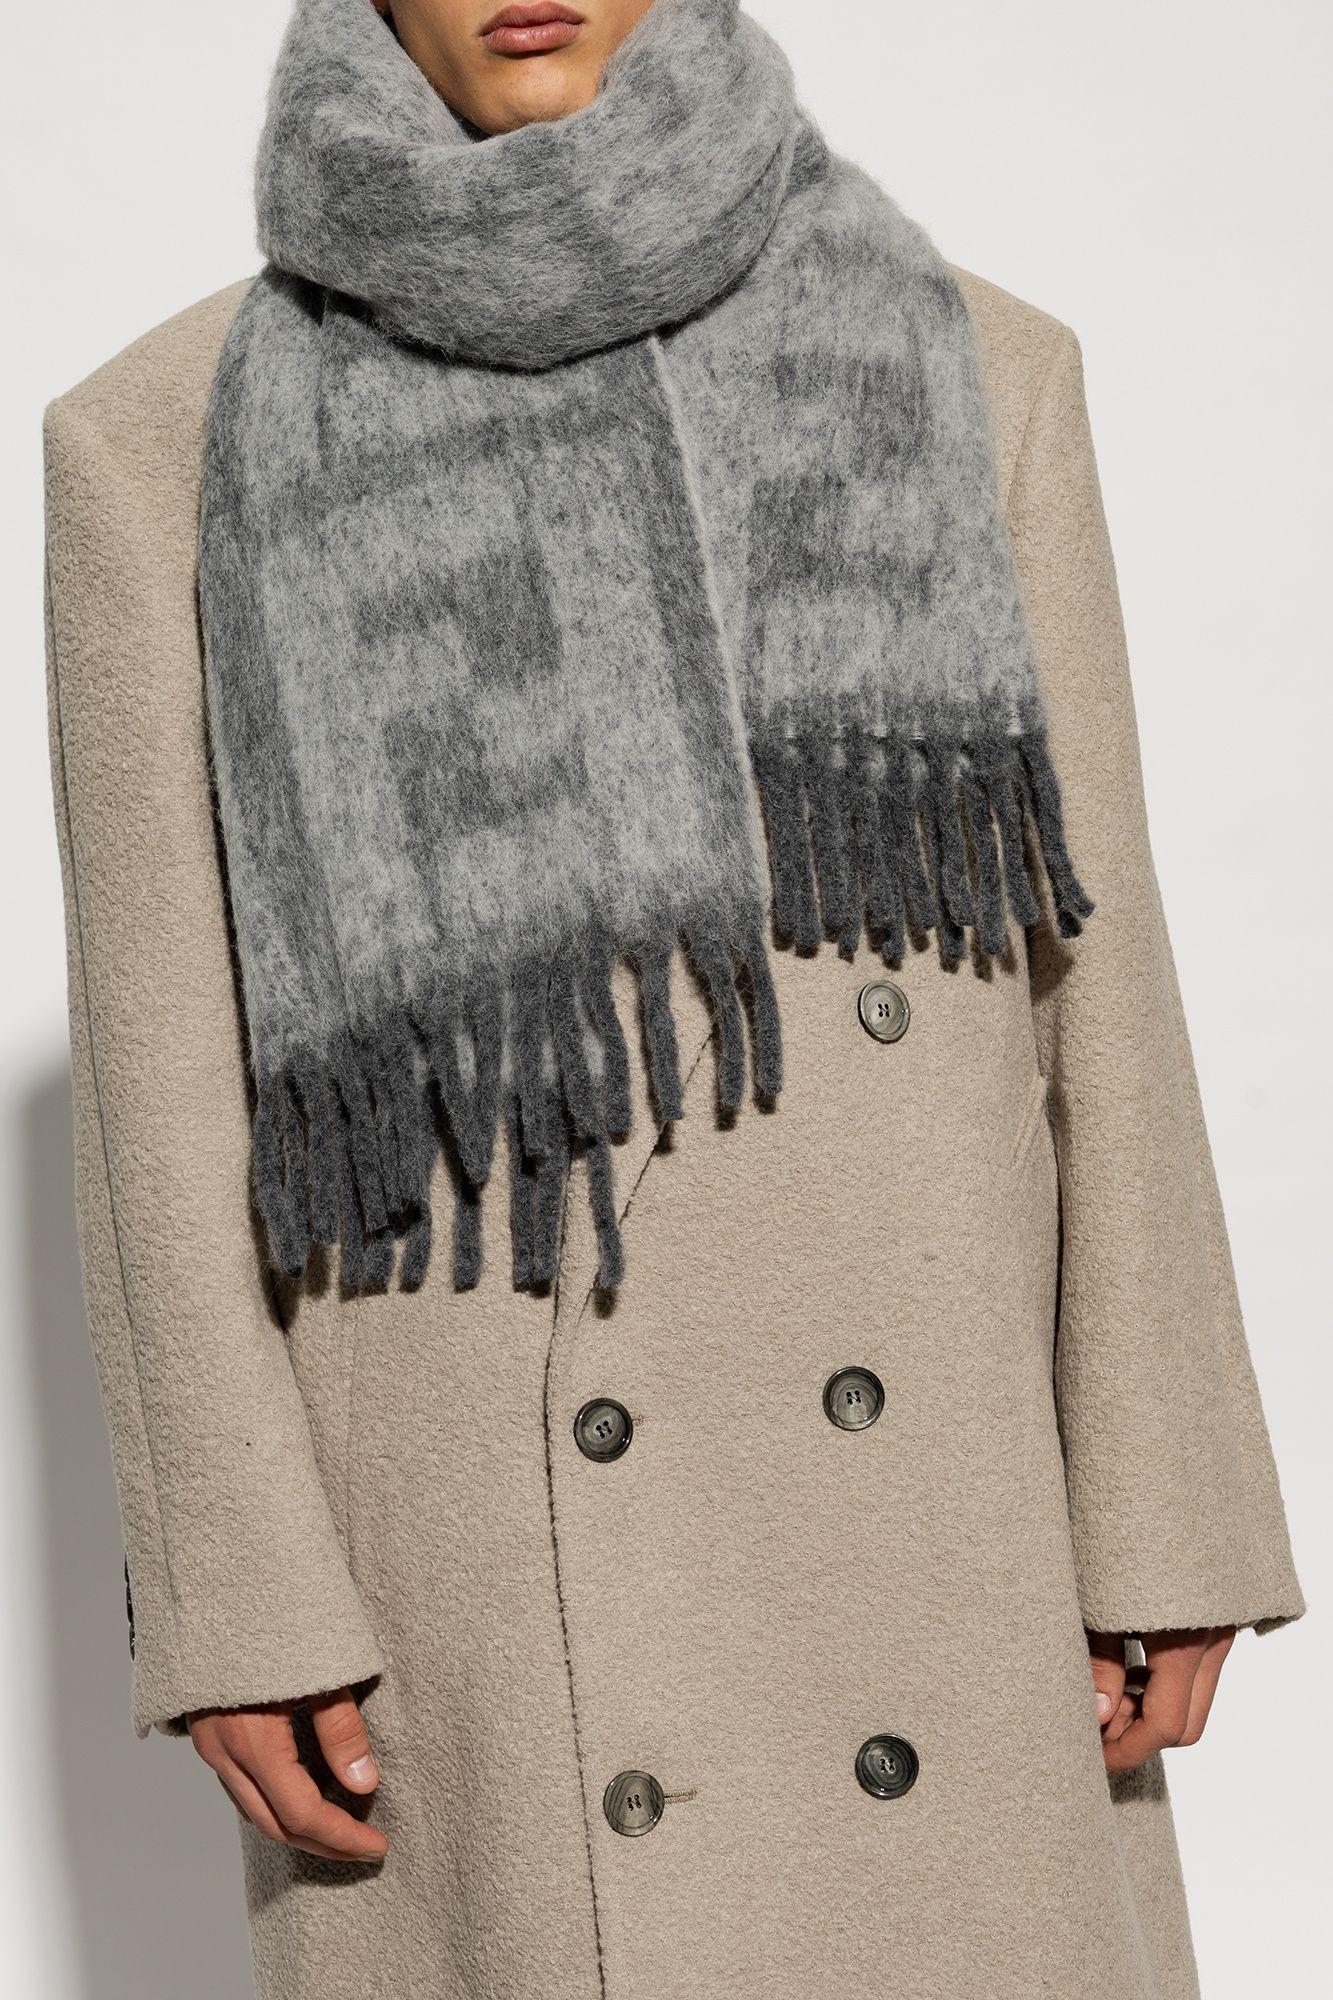 Monogram Wool and Cashmere Graphite Scarf